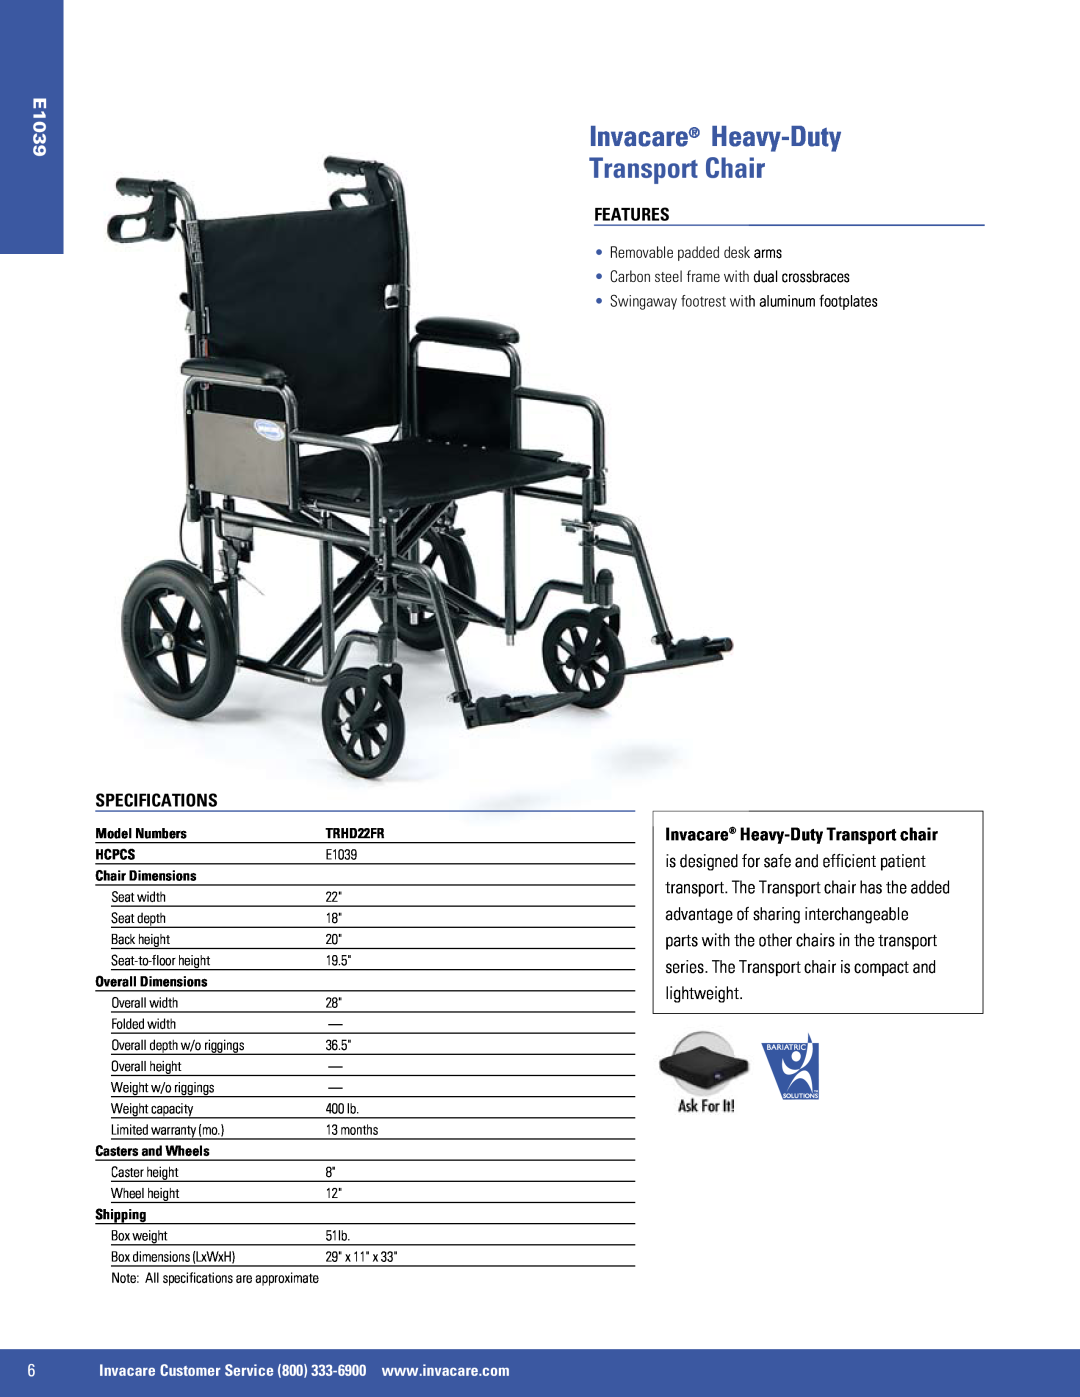 Invacare SX5 Invacare Heavy-Duty Transport Chair, E1039, Specifications, Features, Invacare Heavy-Duty Transport chair 